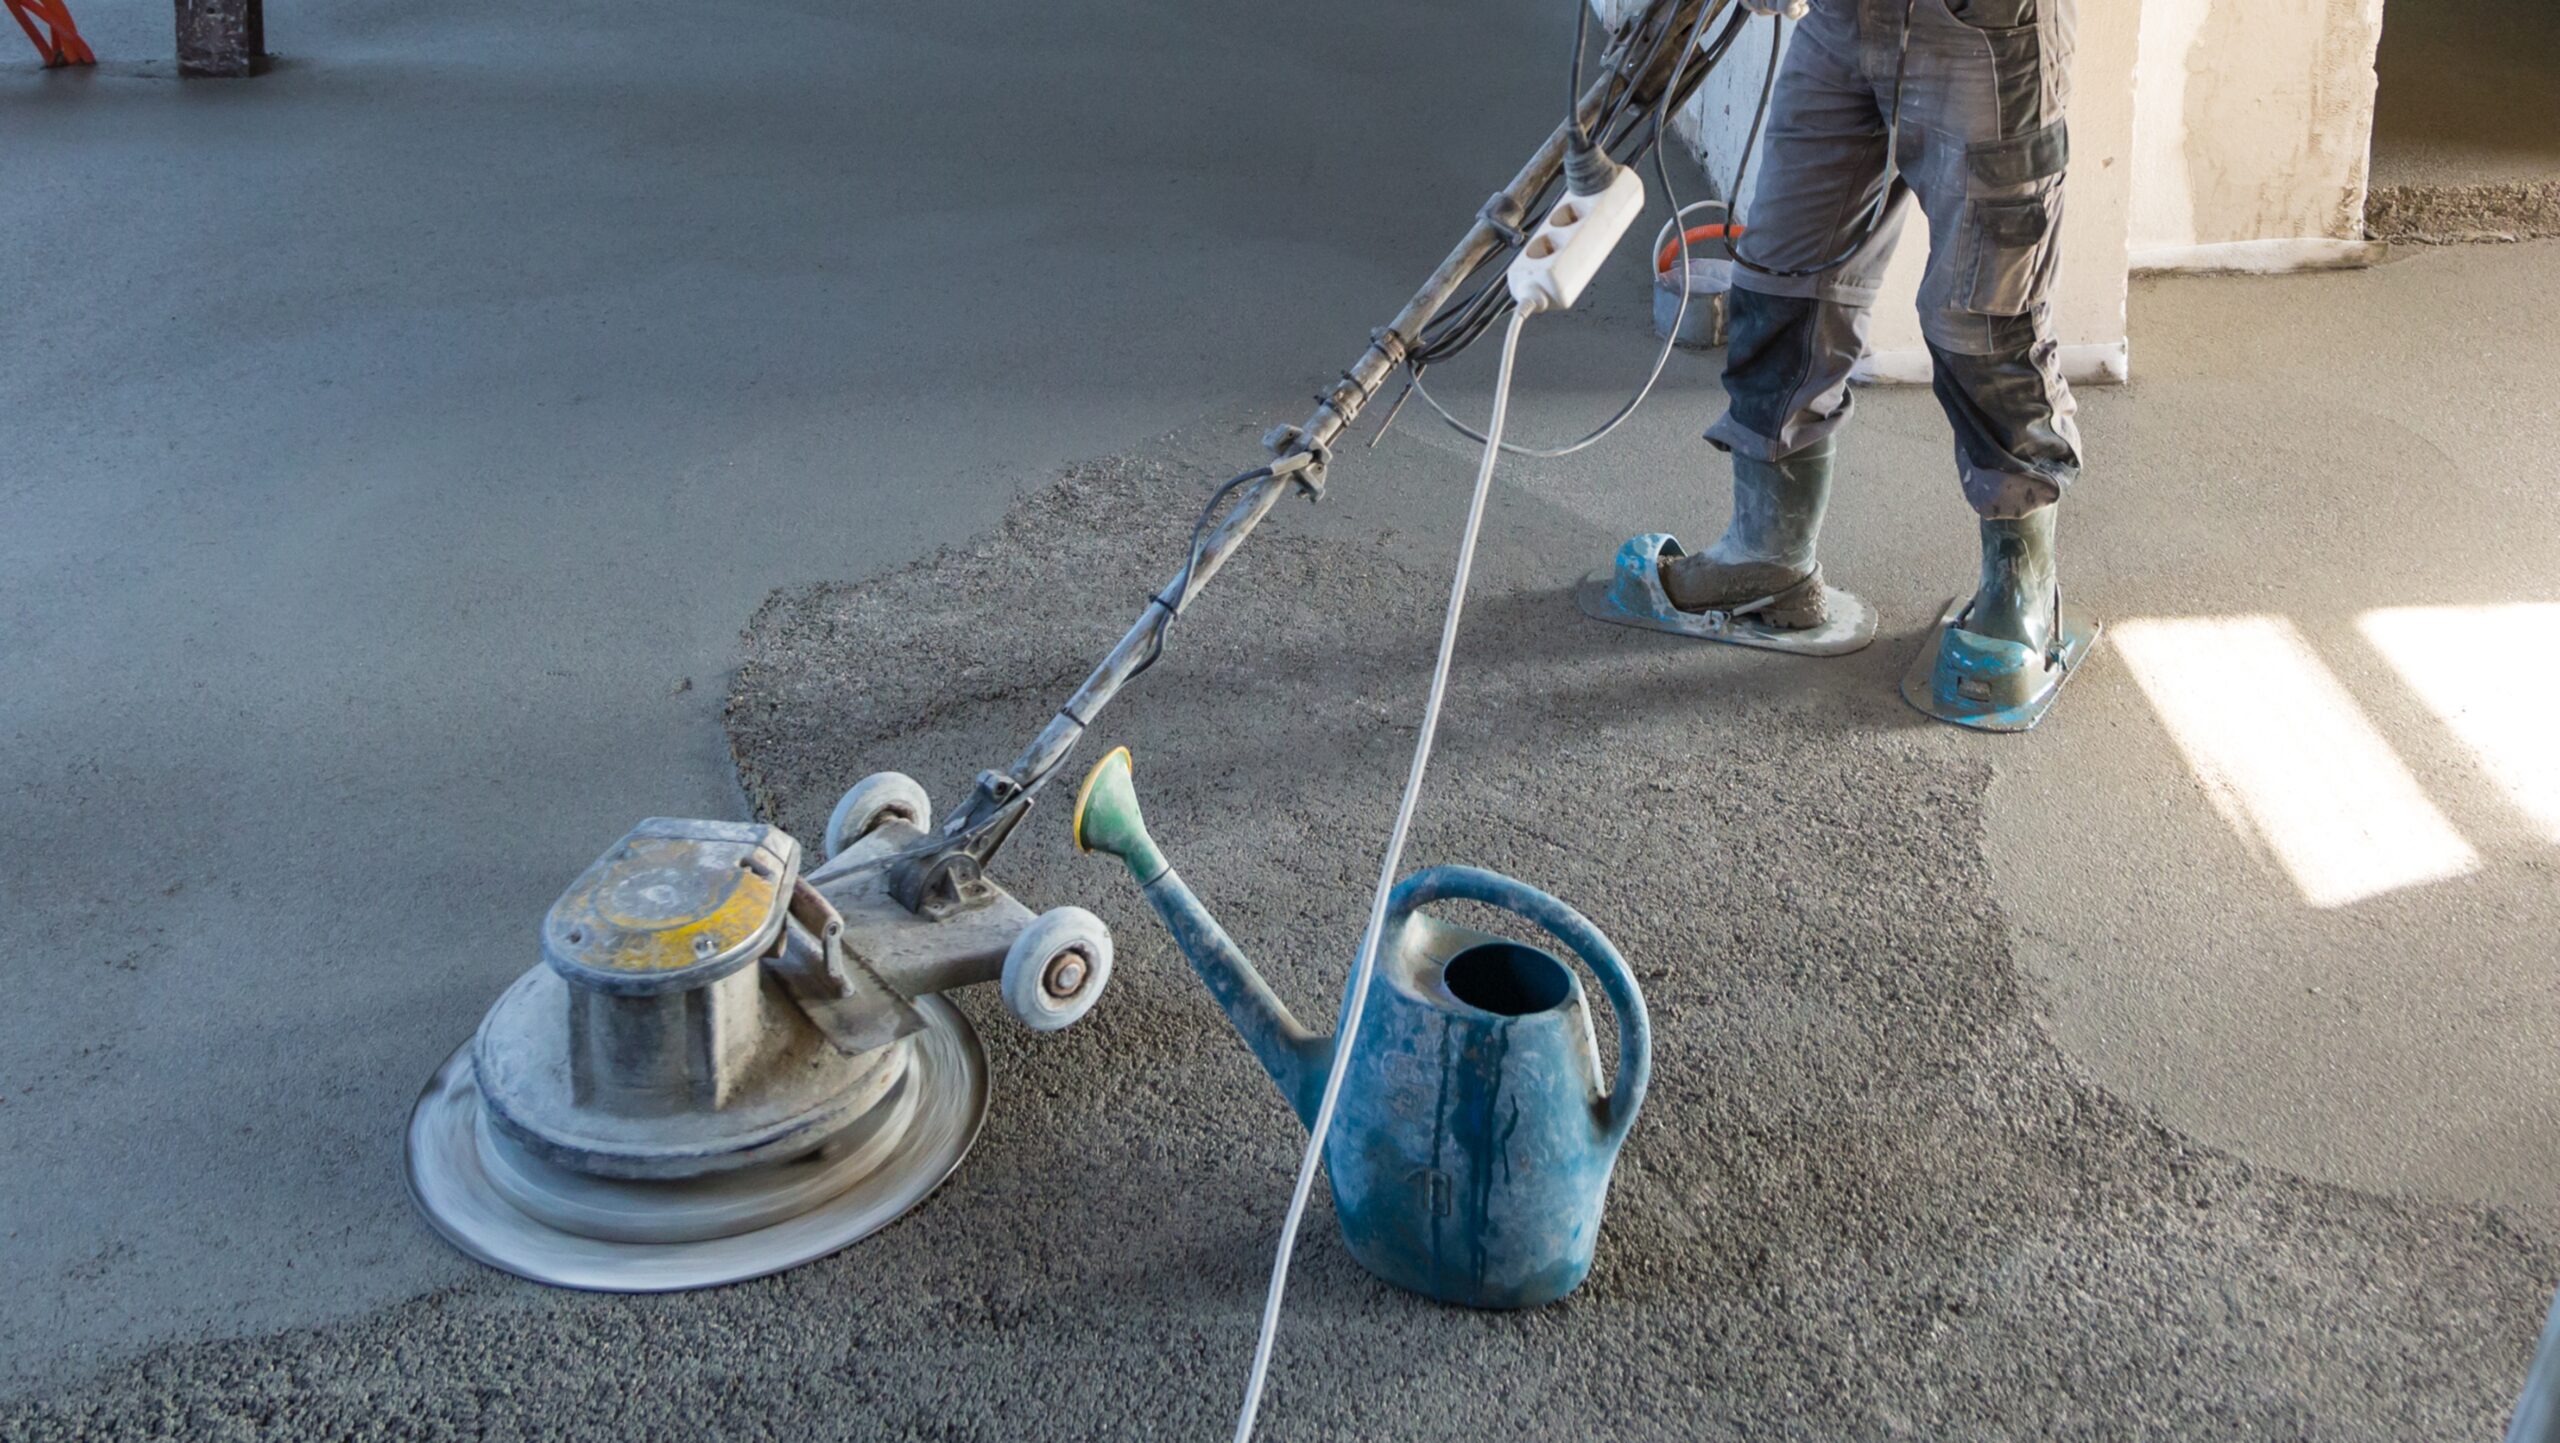 When it comes to concrete services in Mentor, one of the most sought-after options is concrete polishing for floors.